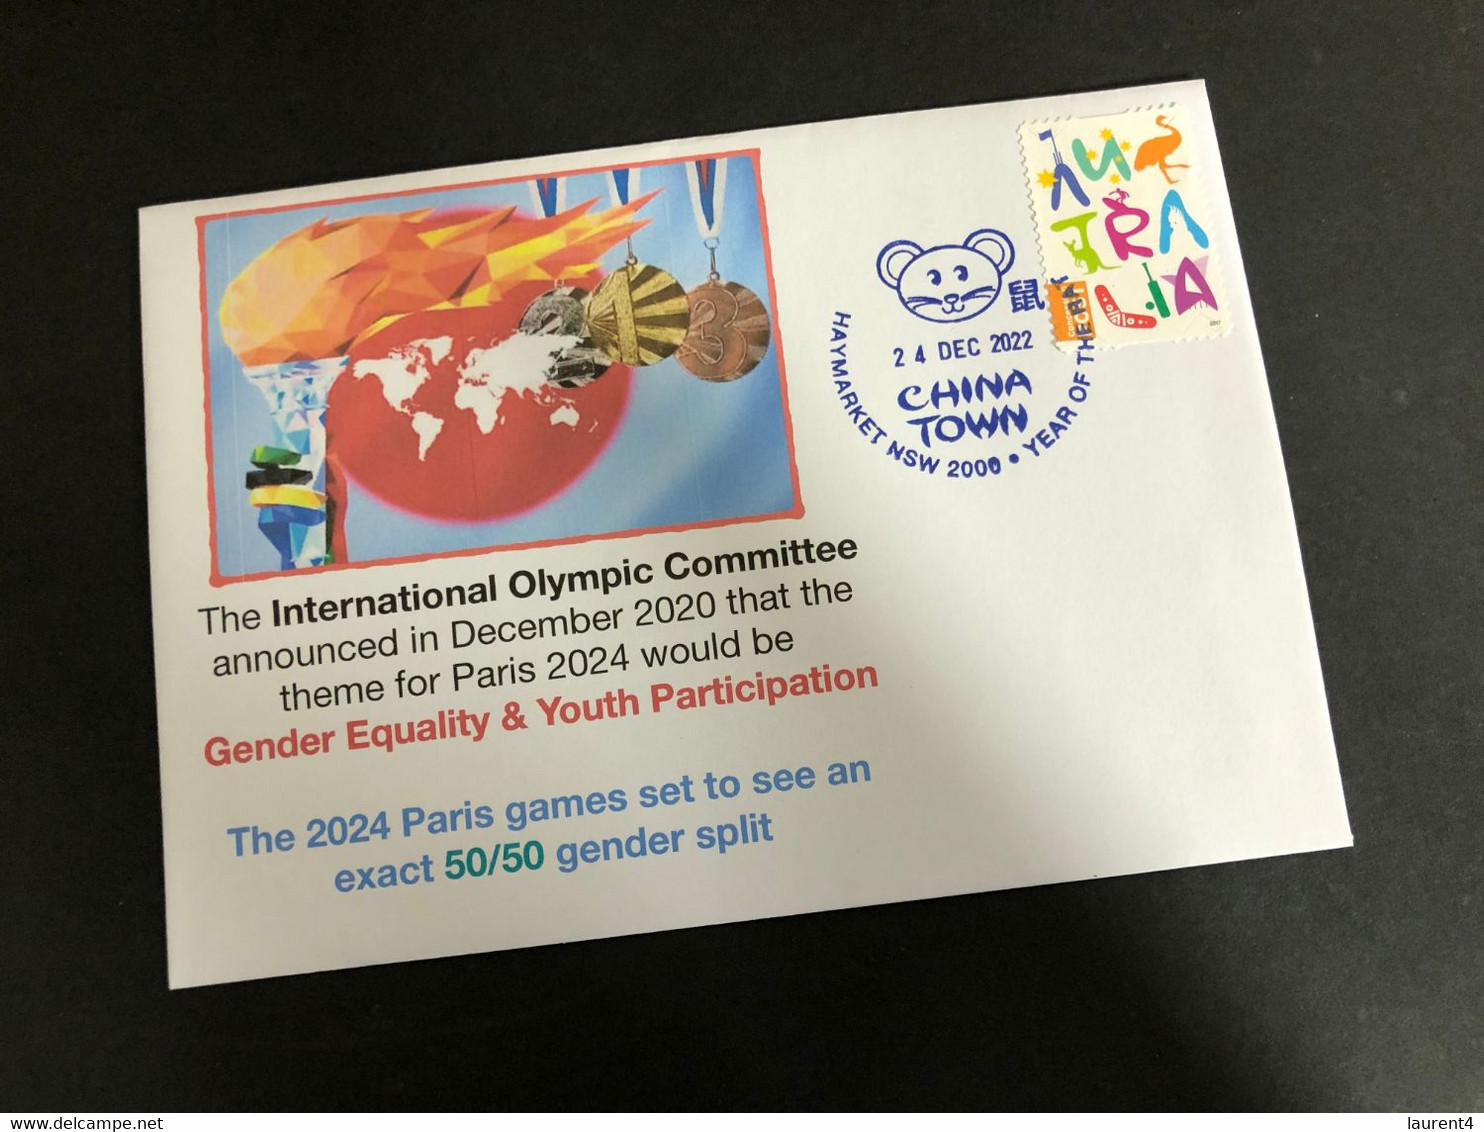 (2 N 8) 2024 France Olympic Games - Gender Equality & Youth Participation Anounced Theme Of The Paris Games (24-12-2022) - Summer 2024: Paris